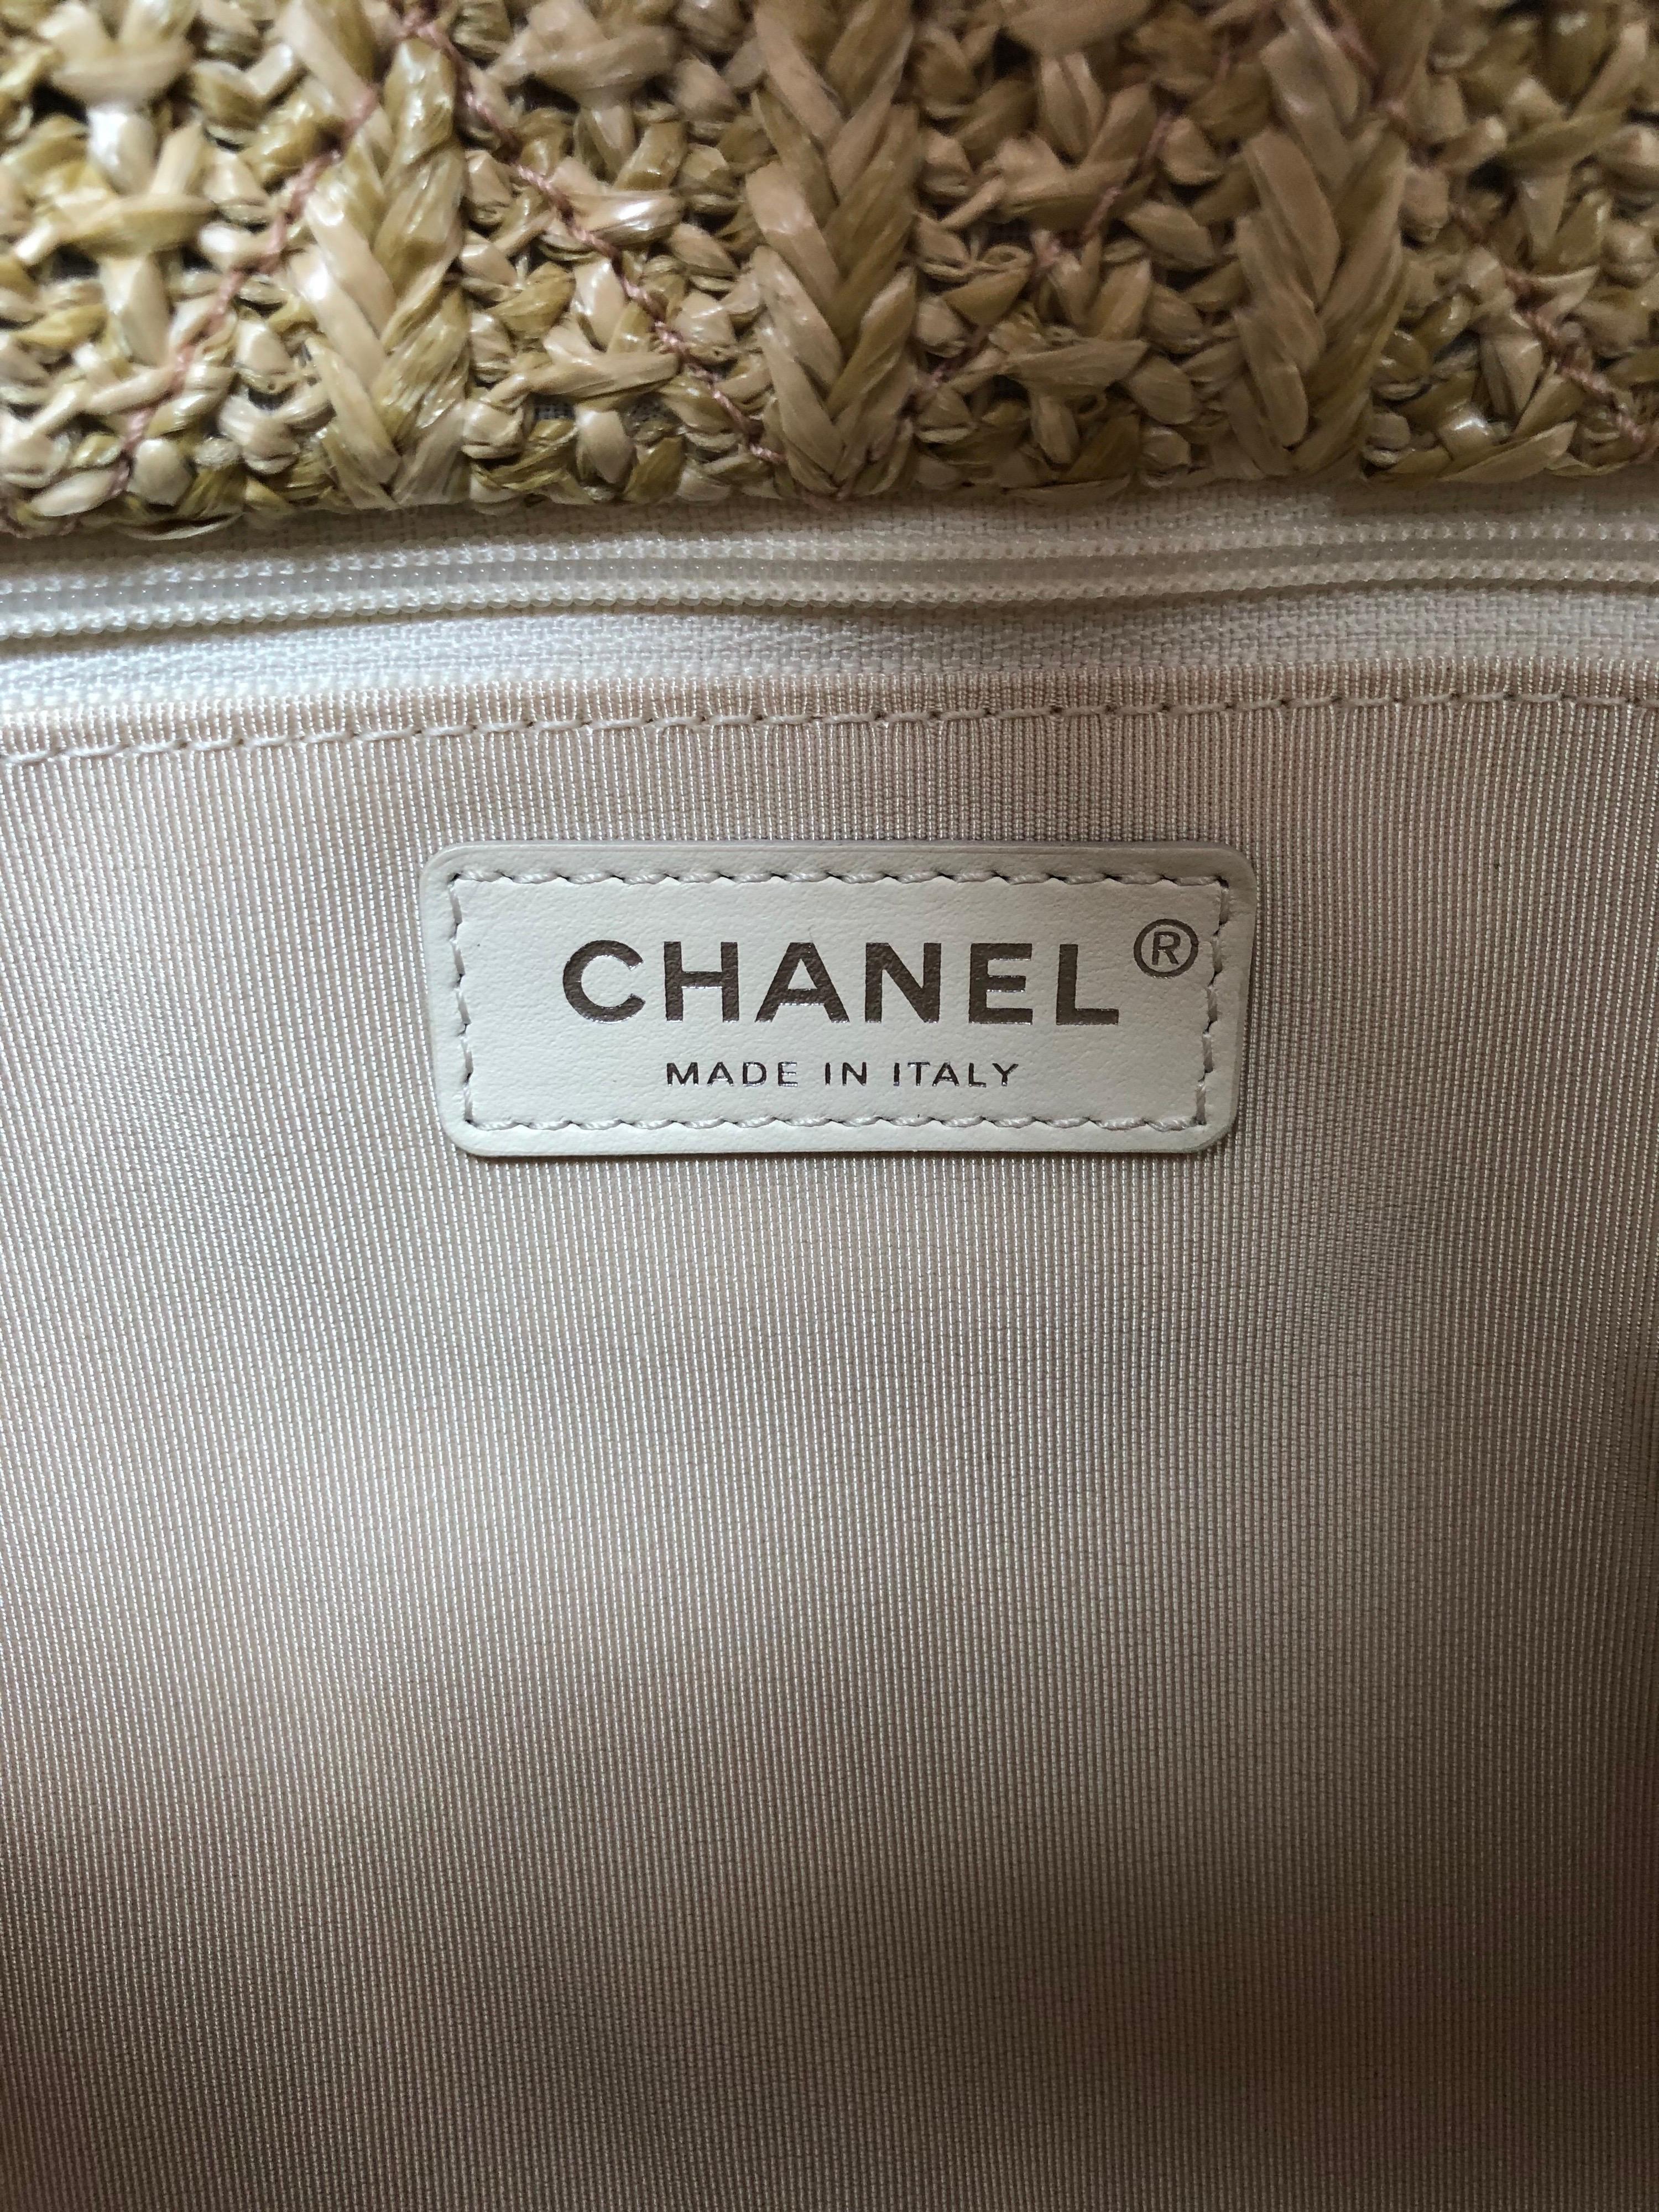 Chanel Clear Pink Leather Bag  4